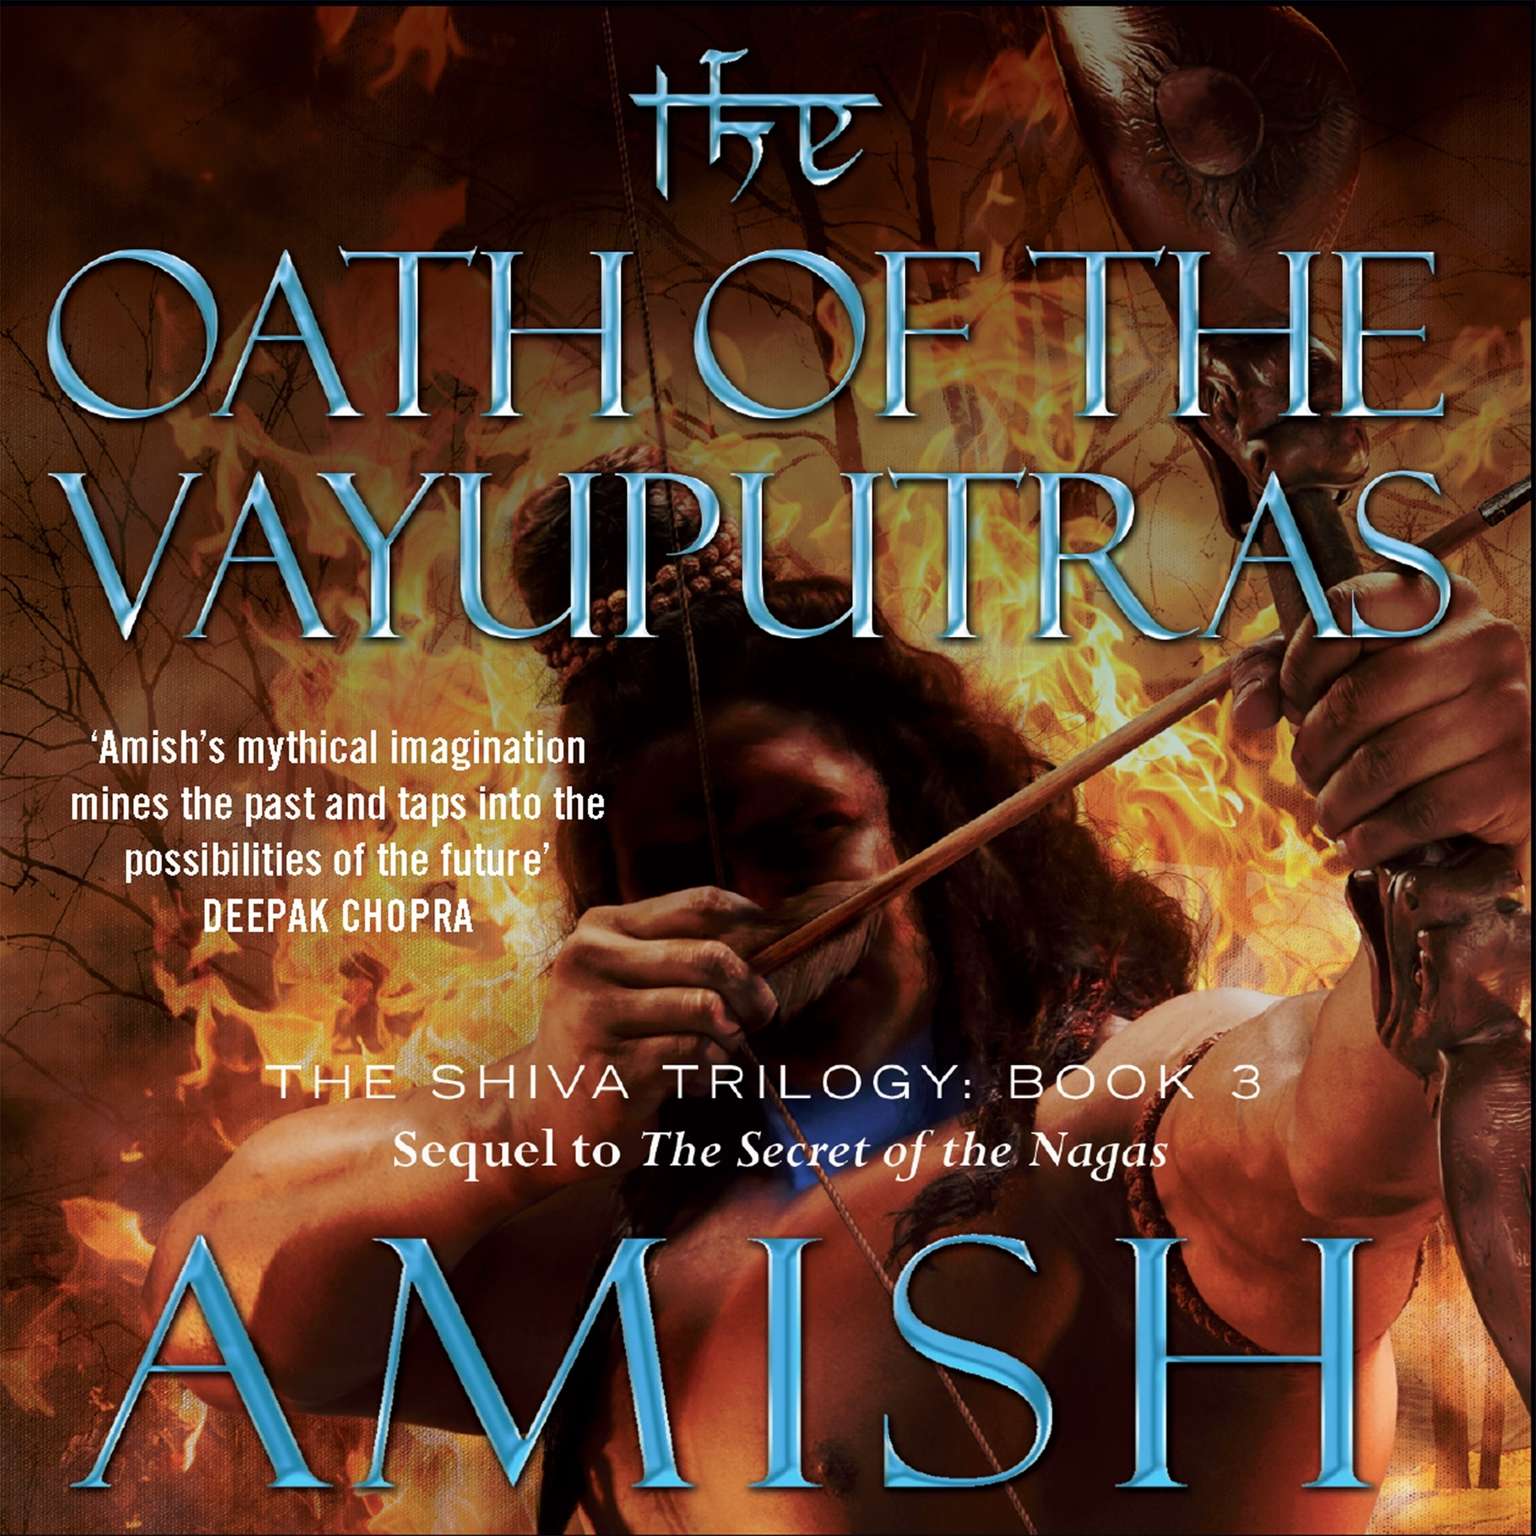 The Oath of the Vayuputras Audiobook by Amish Tripathi — Download Now